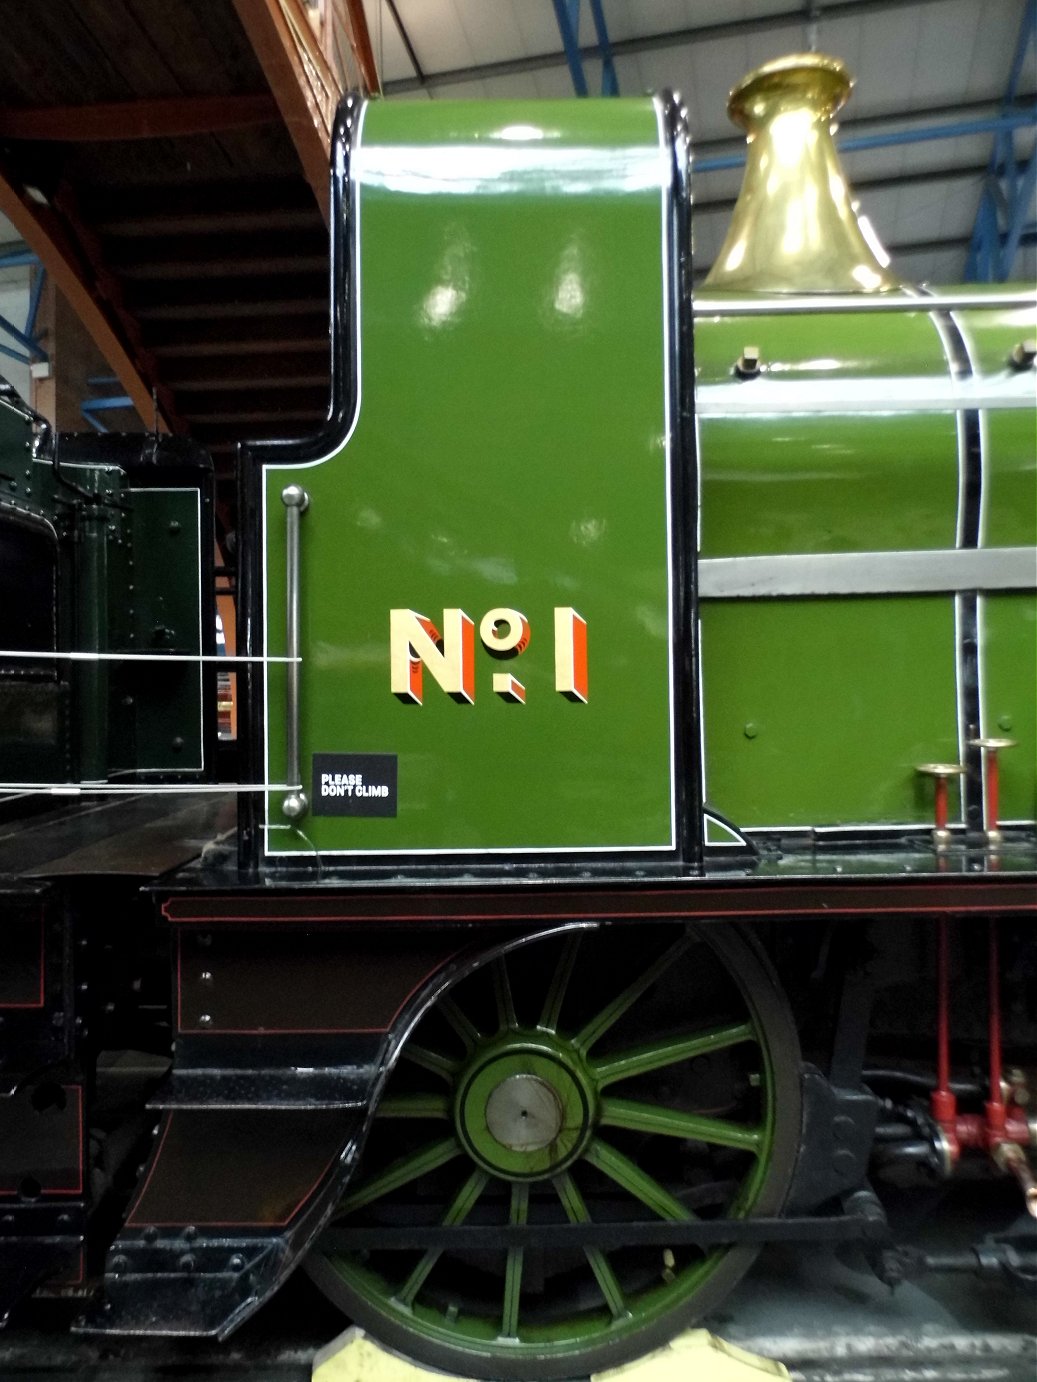 Stirling Single at the National Raiway Museum, Thurs 10/10/2019. 